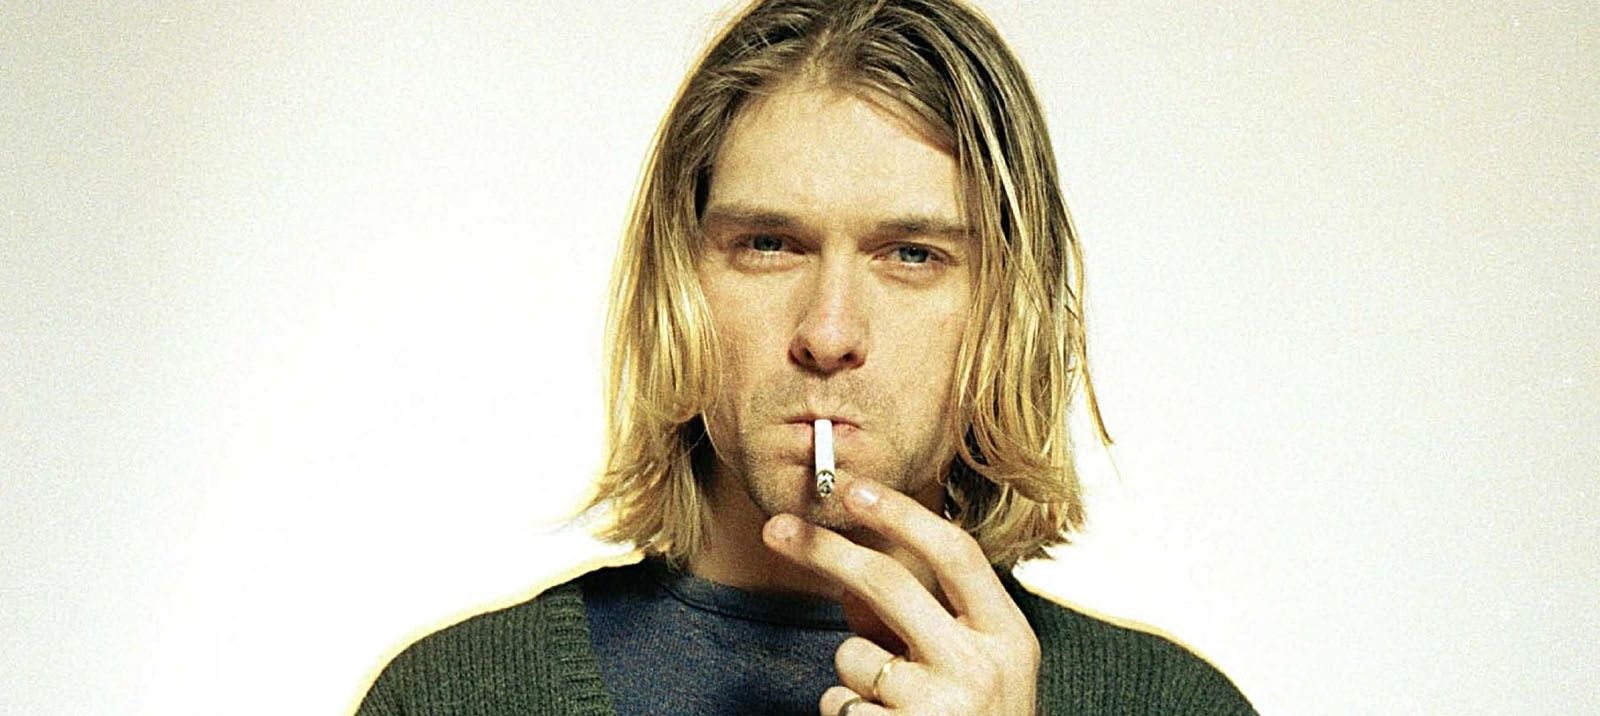 Kurt Cobain documentary 'Montage of Heck' to air on HBO in 2015